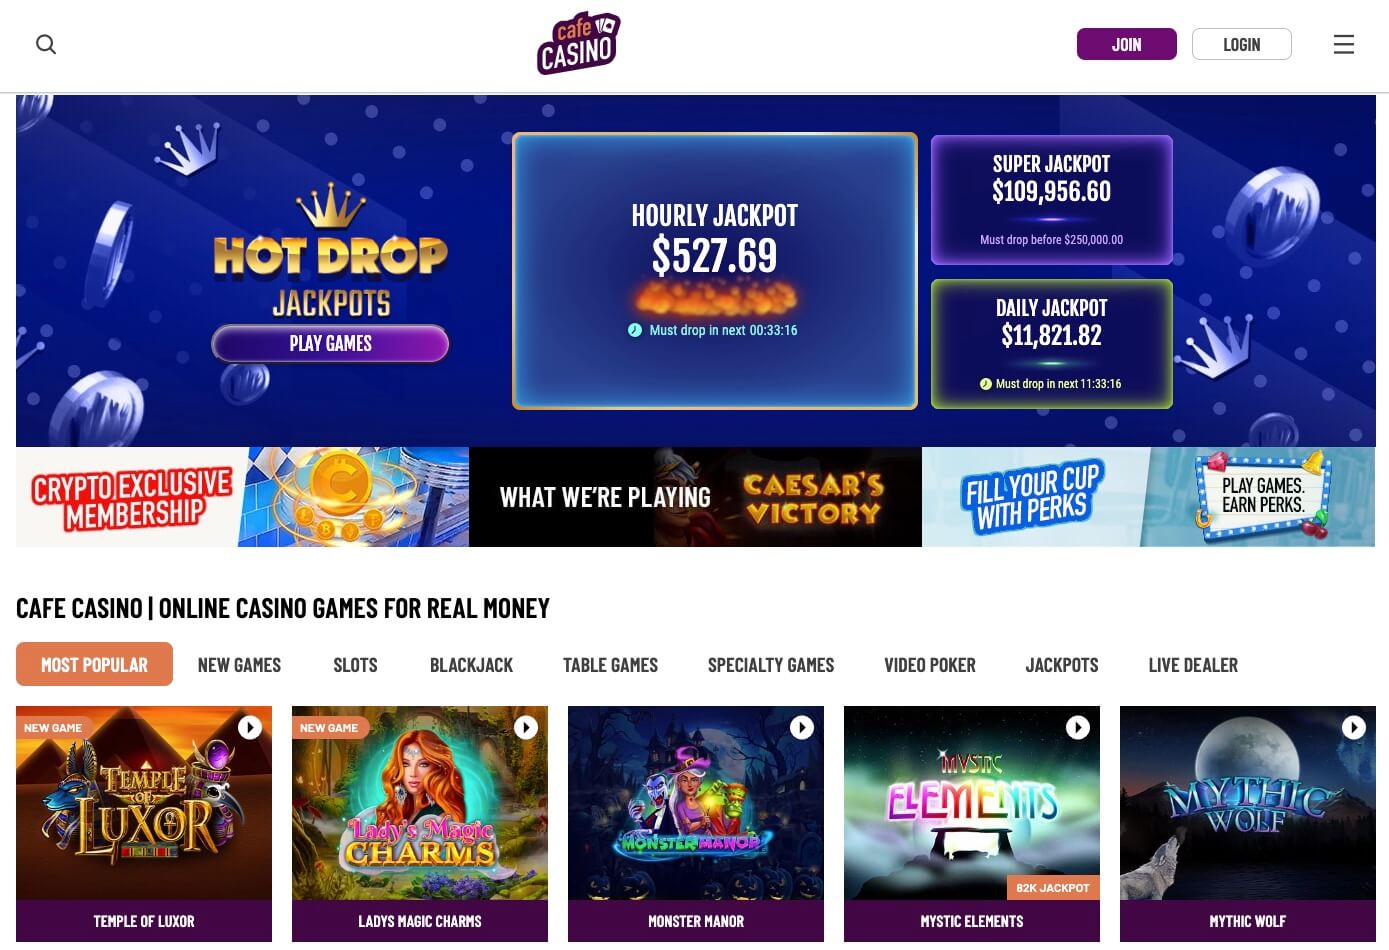 How To Find The Time To new jersey online casino no deposit bonus On Google